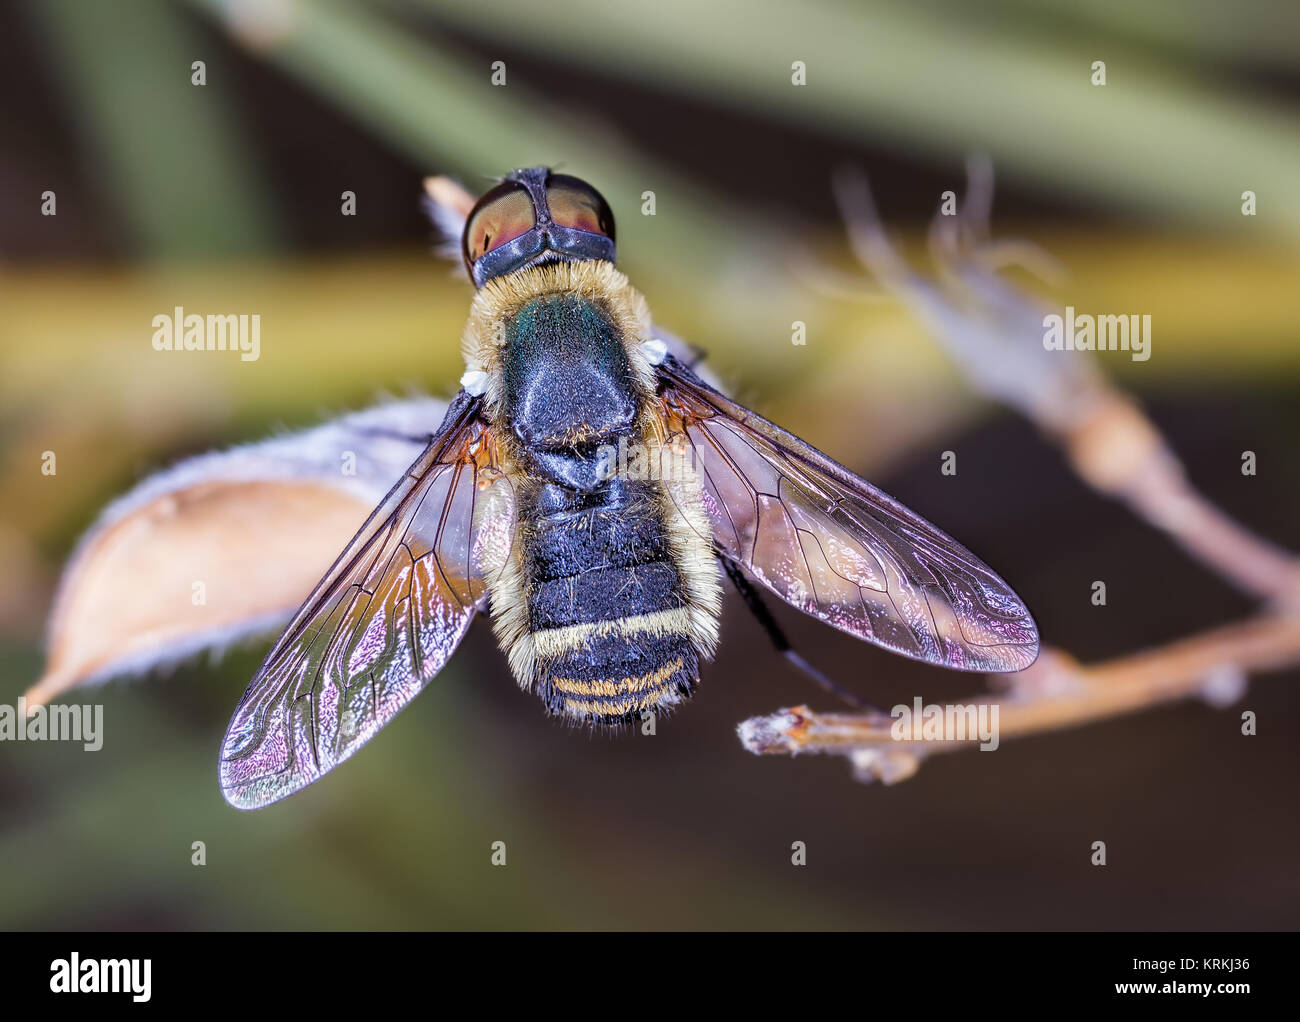 Fly species photographed in their natural environment. Stock Photo